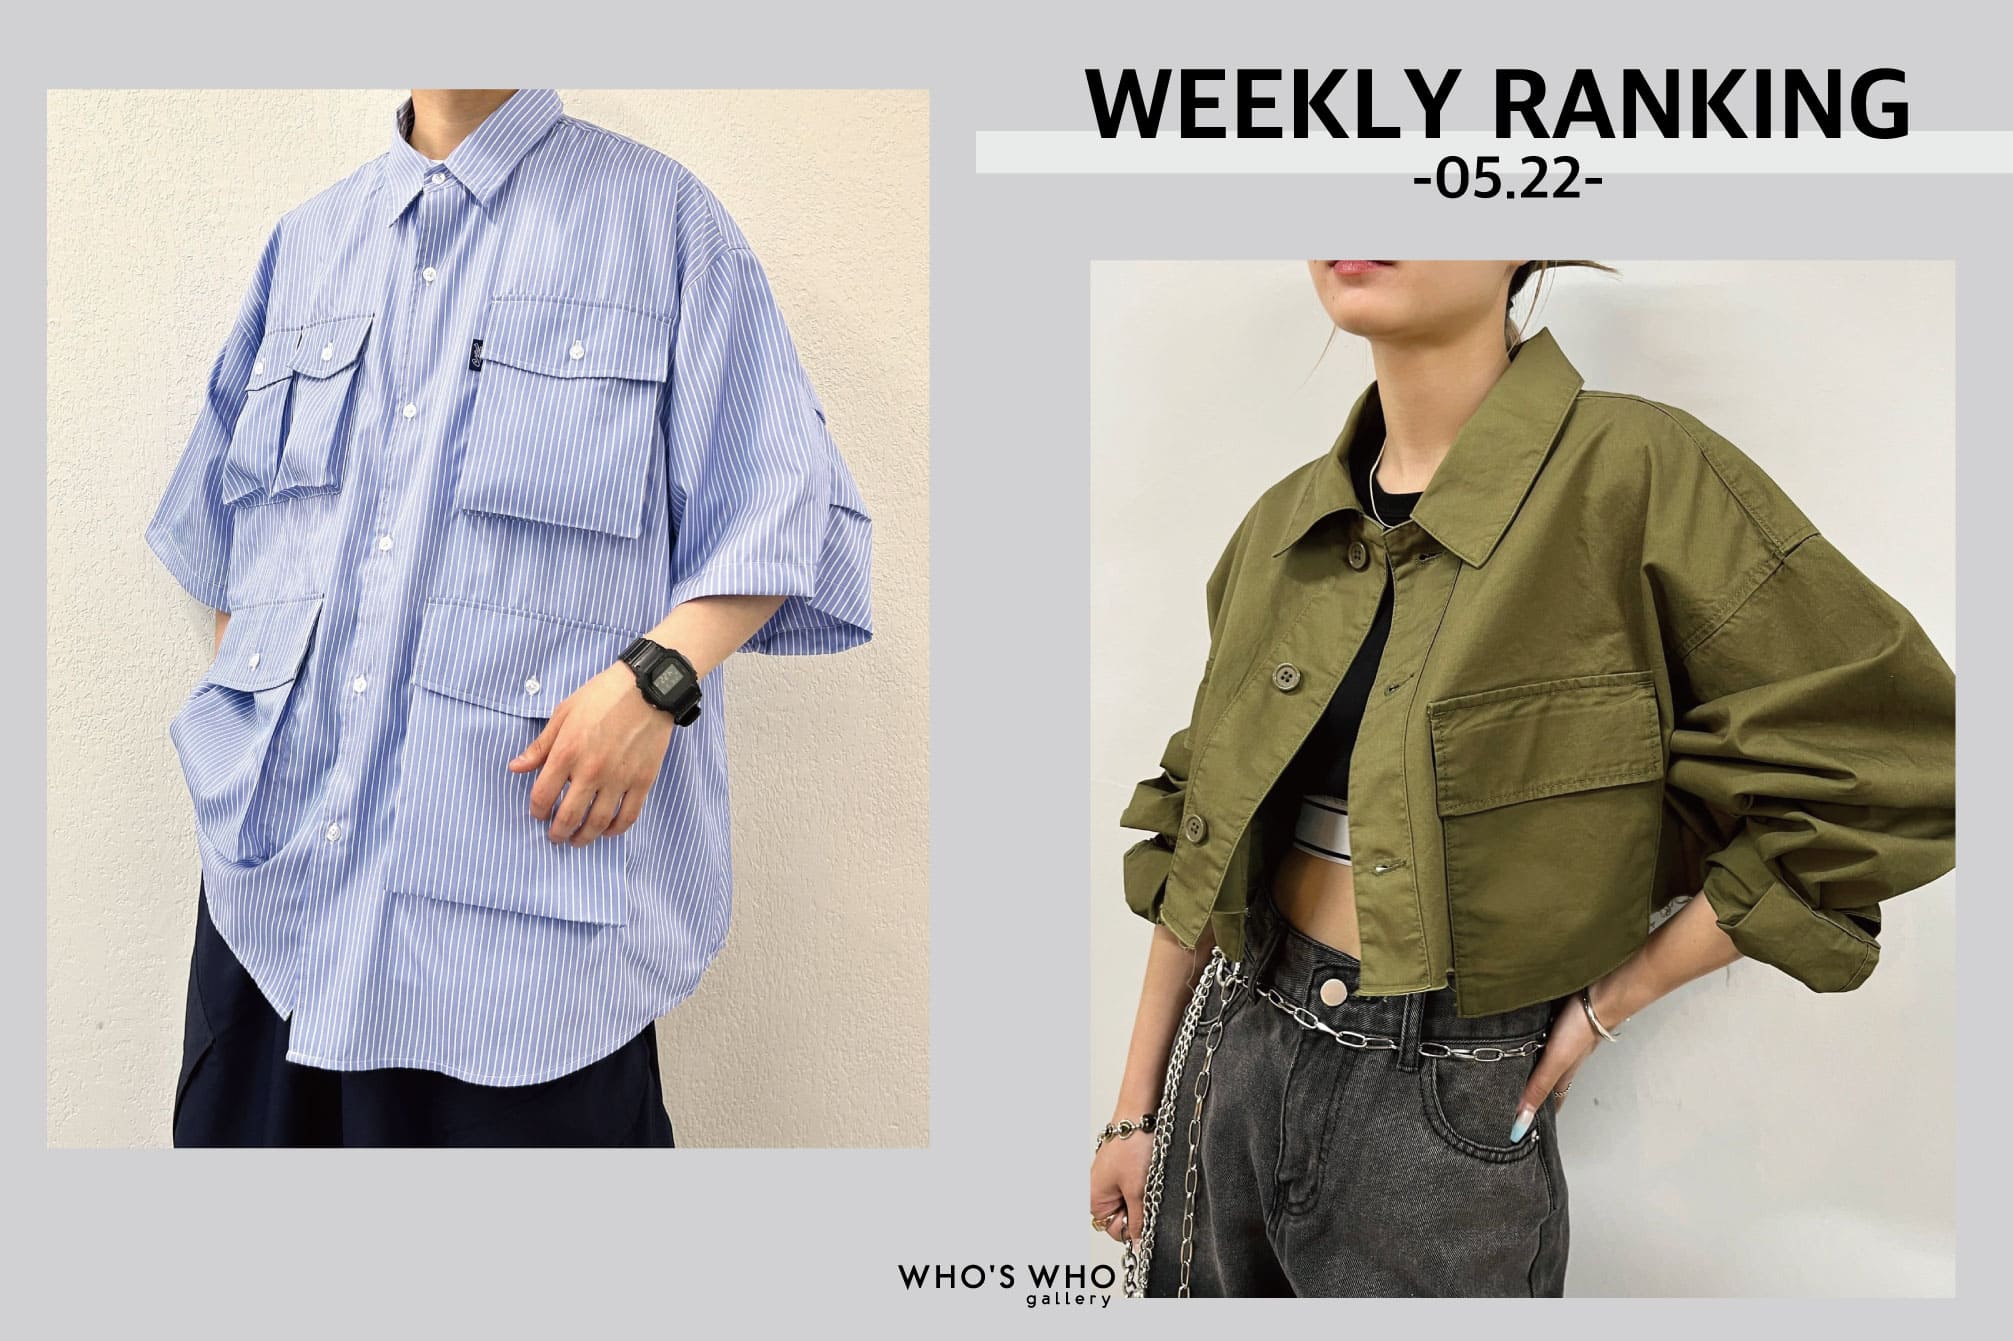 WHO’S WHO gallery 【WEEKLY RANKING -05.22-】